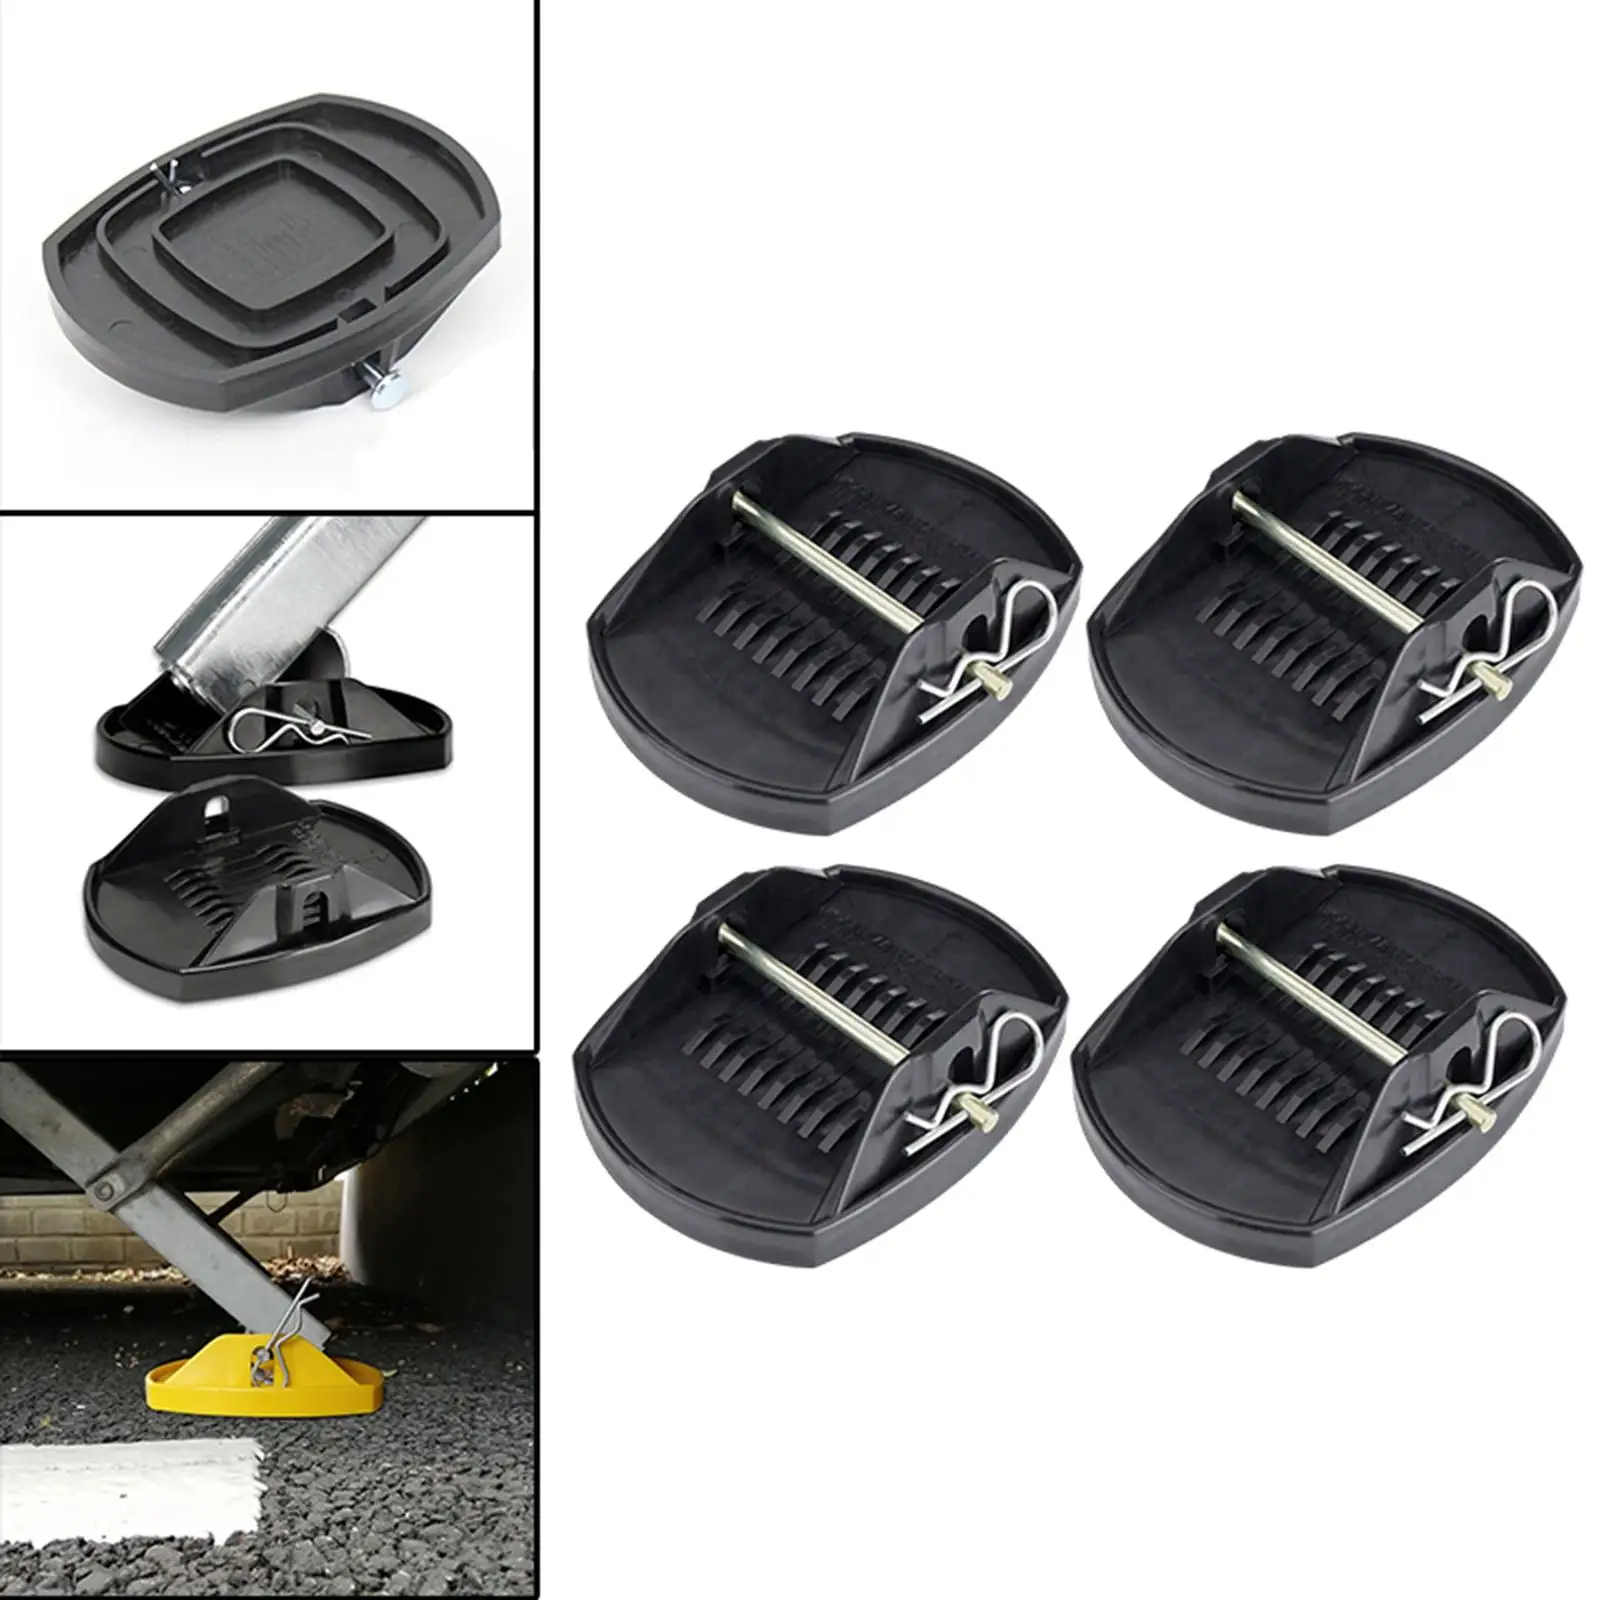 4 Pieces  Pads Wheel Foot Leg Support Adapter for Trailers